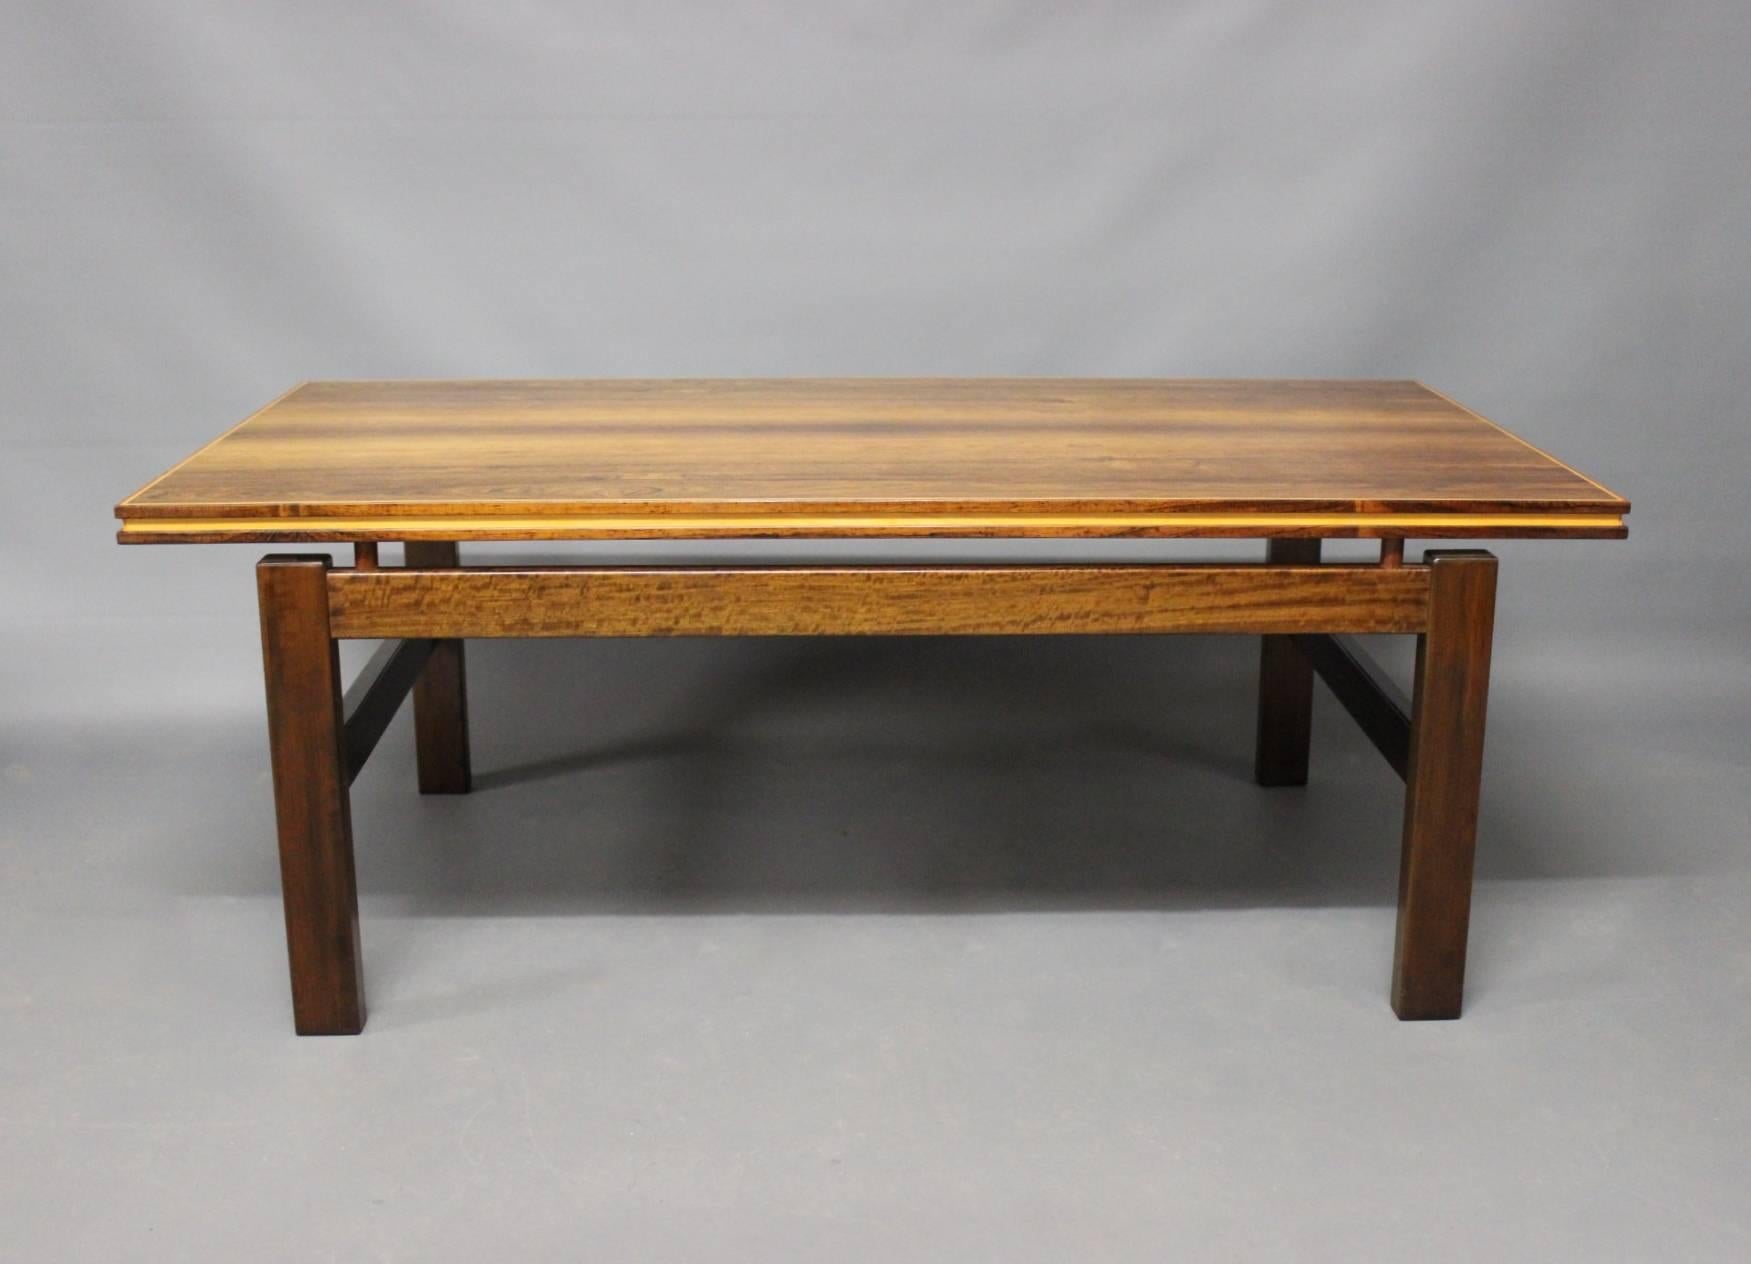 Exquisite Danish Design Rosewood Coffee Table from the 1960s: A timeless piece that epitomizes the elegance and sophistication of mid-century craftsmanship.

Crafted from lustrous rosewood, this coffee table exemplifies the iconic design principles